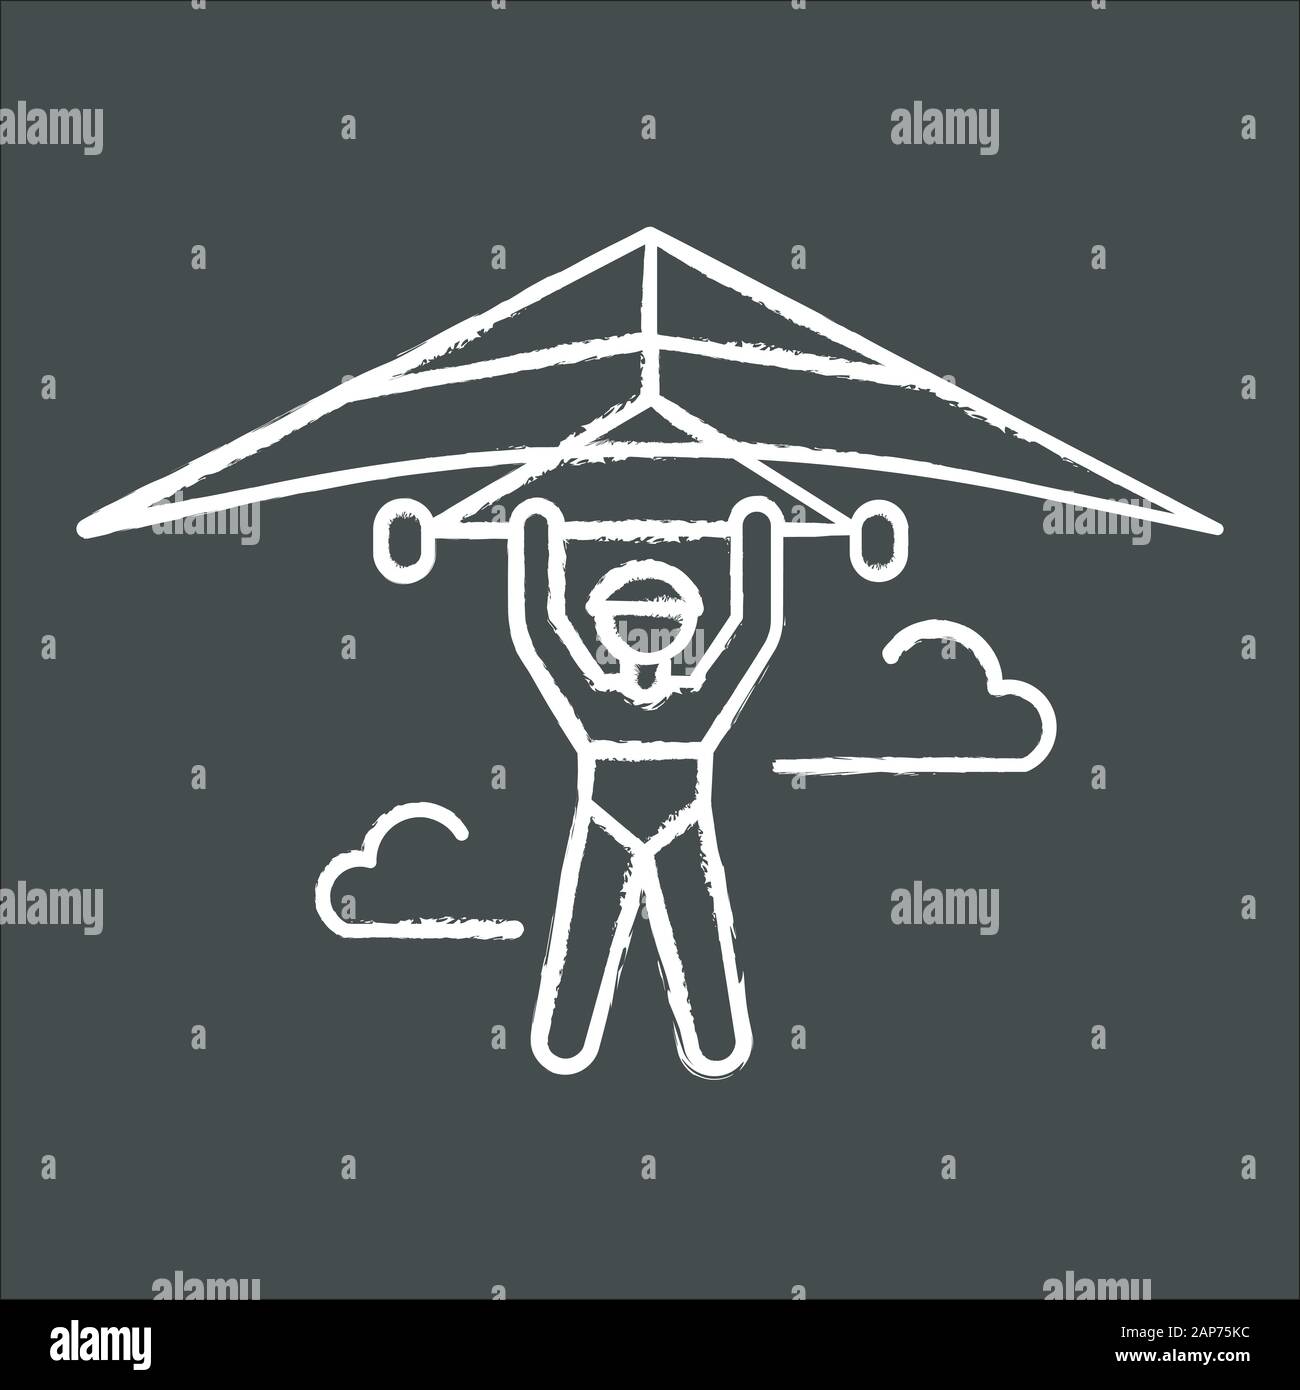 Hang gliding chalk icon. Hangglider pilot flying. Extreme air sport. Skydiving stunt. Adrenaline flights in sky. Paragliding trick. Isolated vector ch Stock Vector